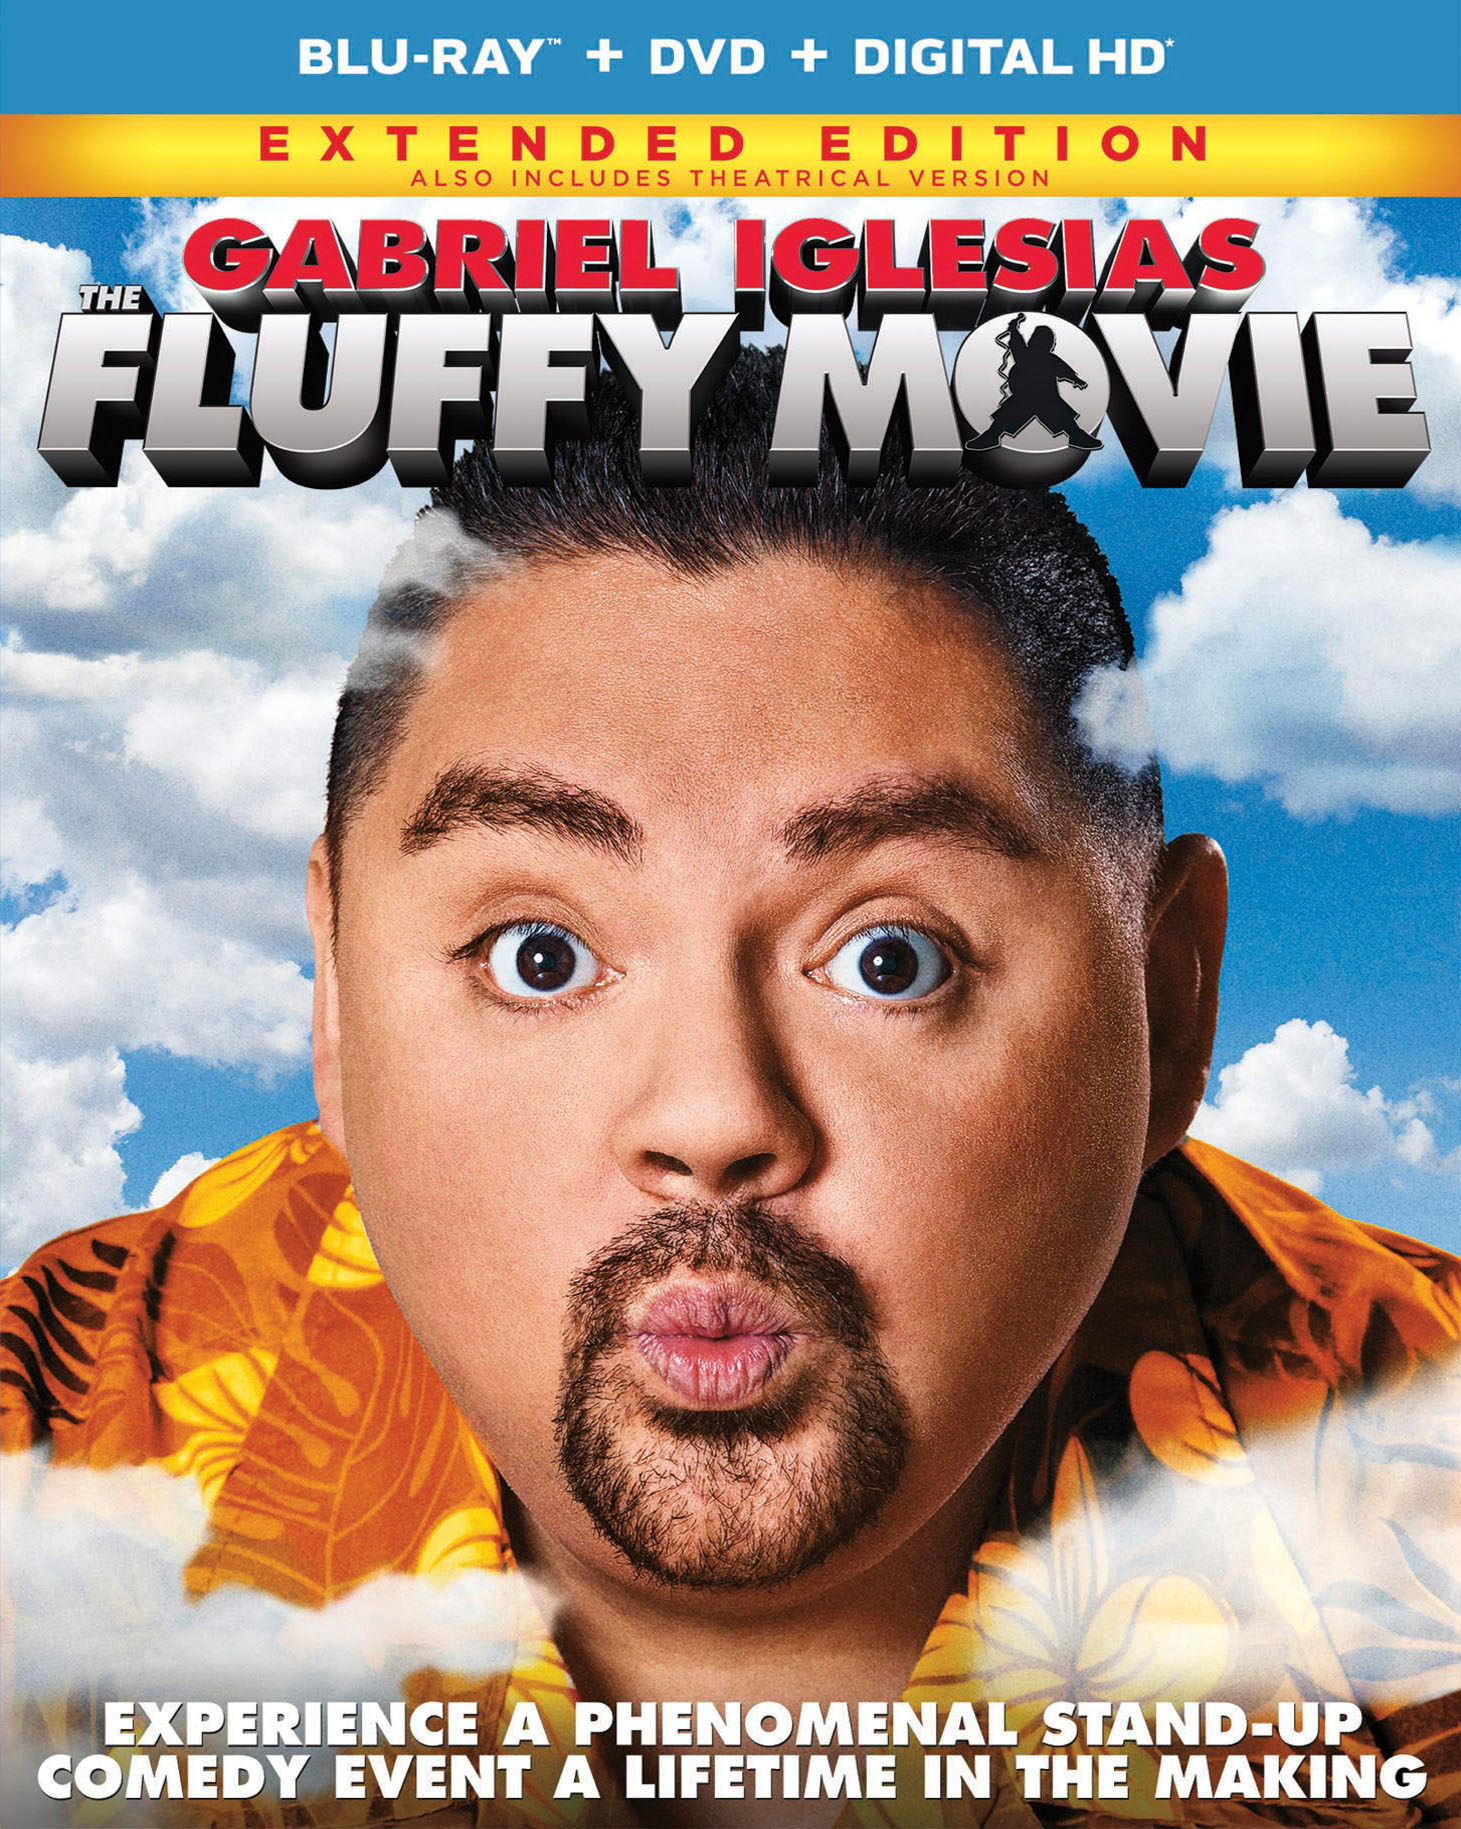 The Fluffy Movie (Extended Edition DVD) - Blu-ray [ 2014 ]  - Documentaries On Blu-ray